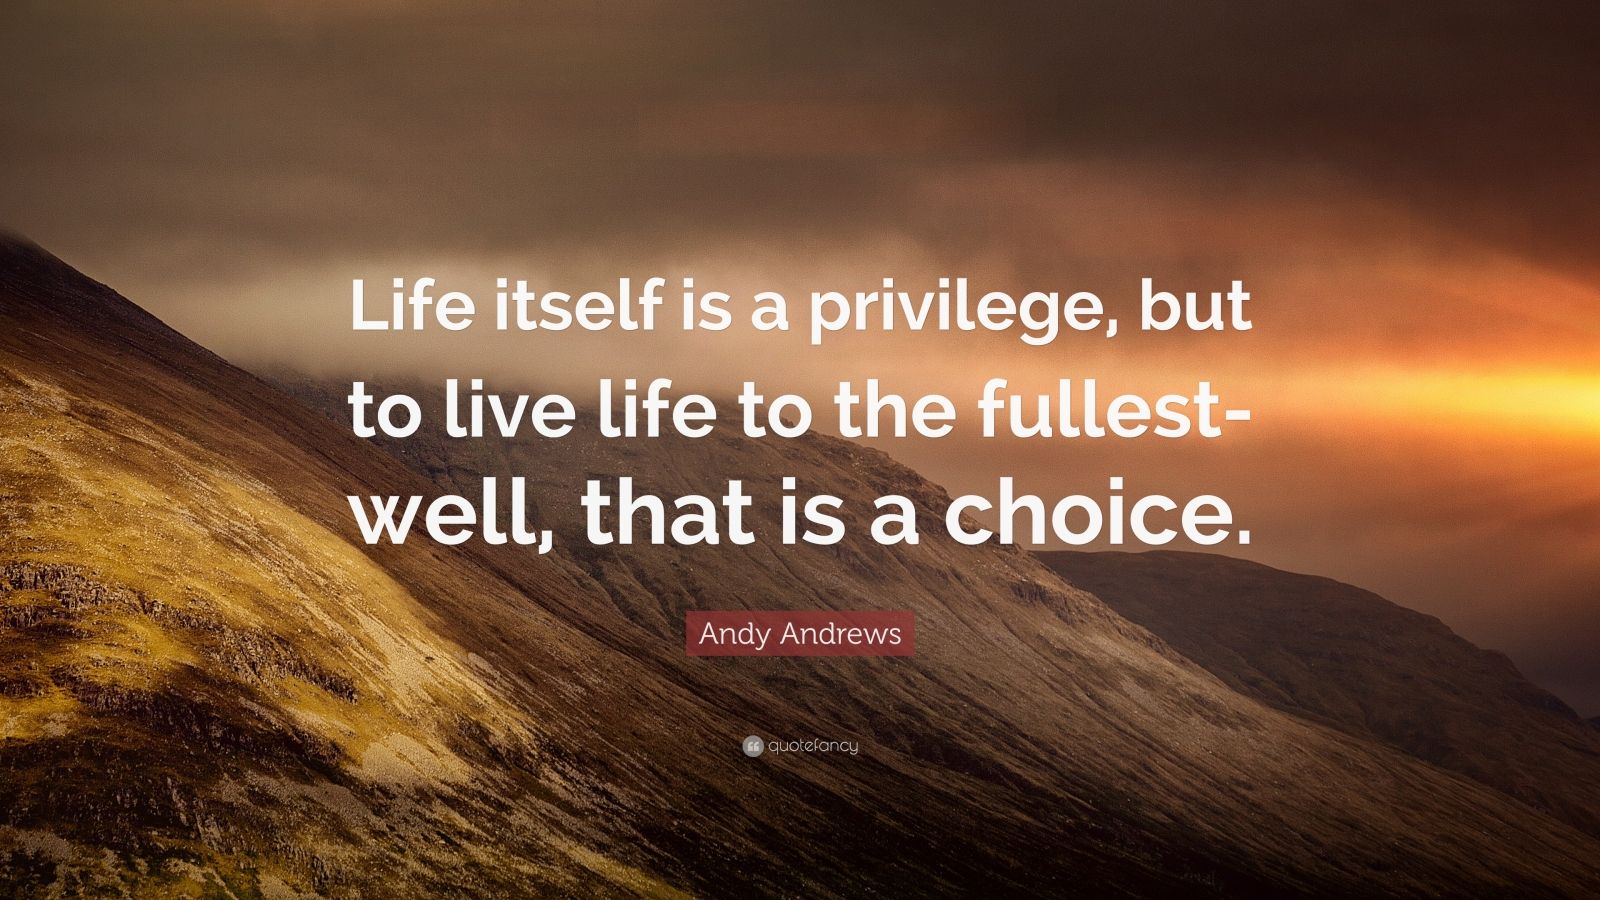 Andy Andrews Quote: “Life itself is a privilege, but to live life to ...